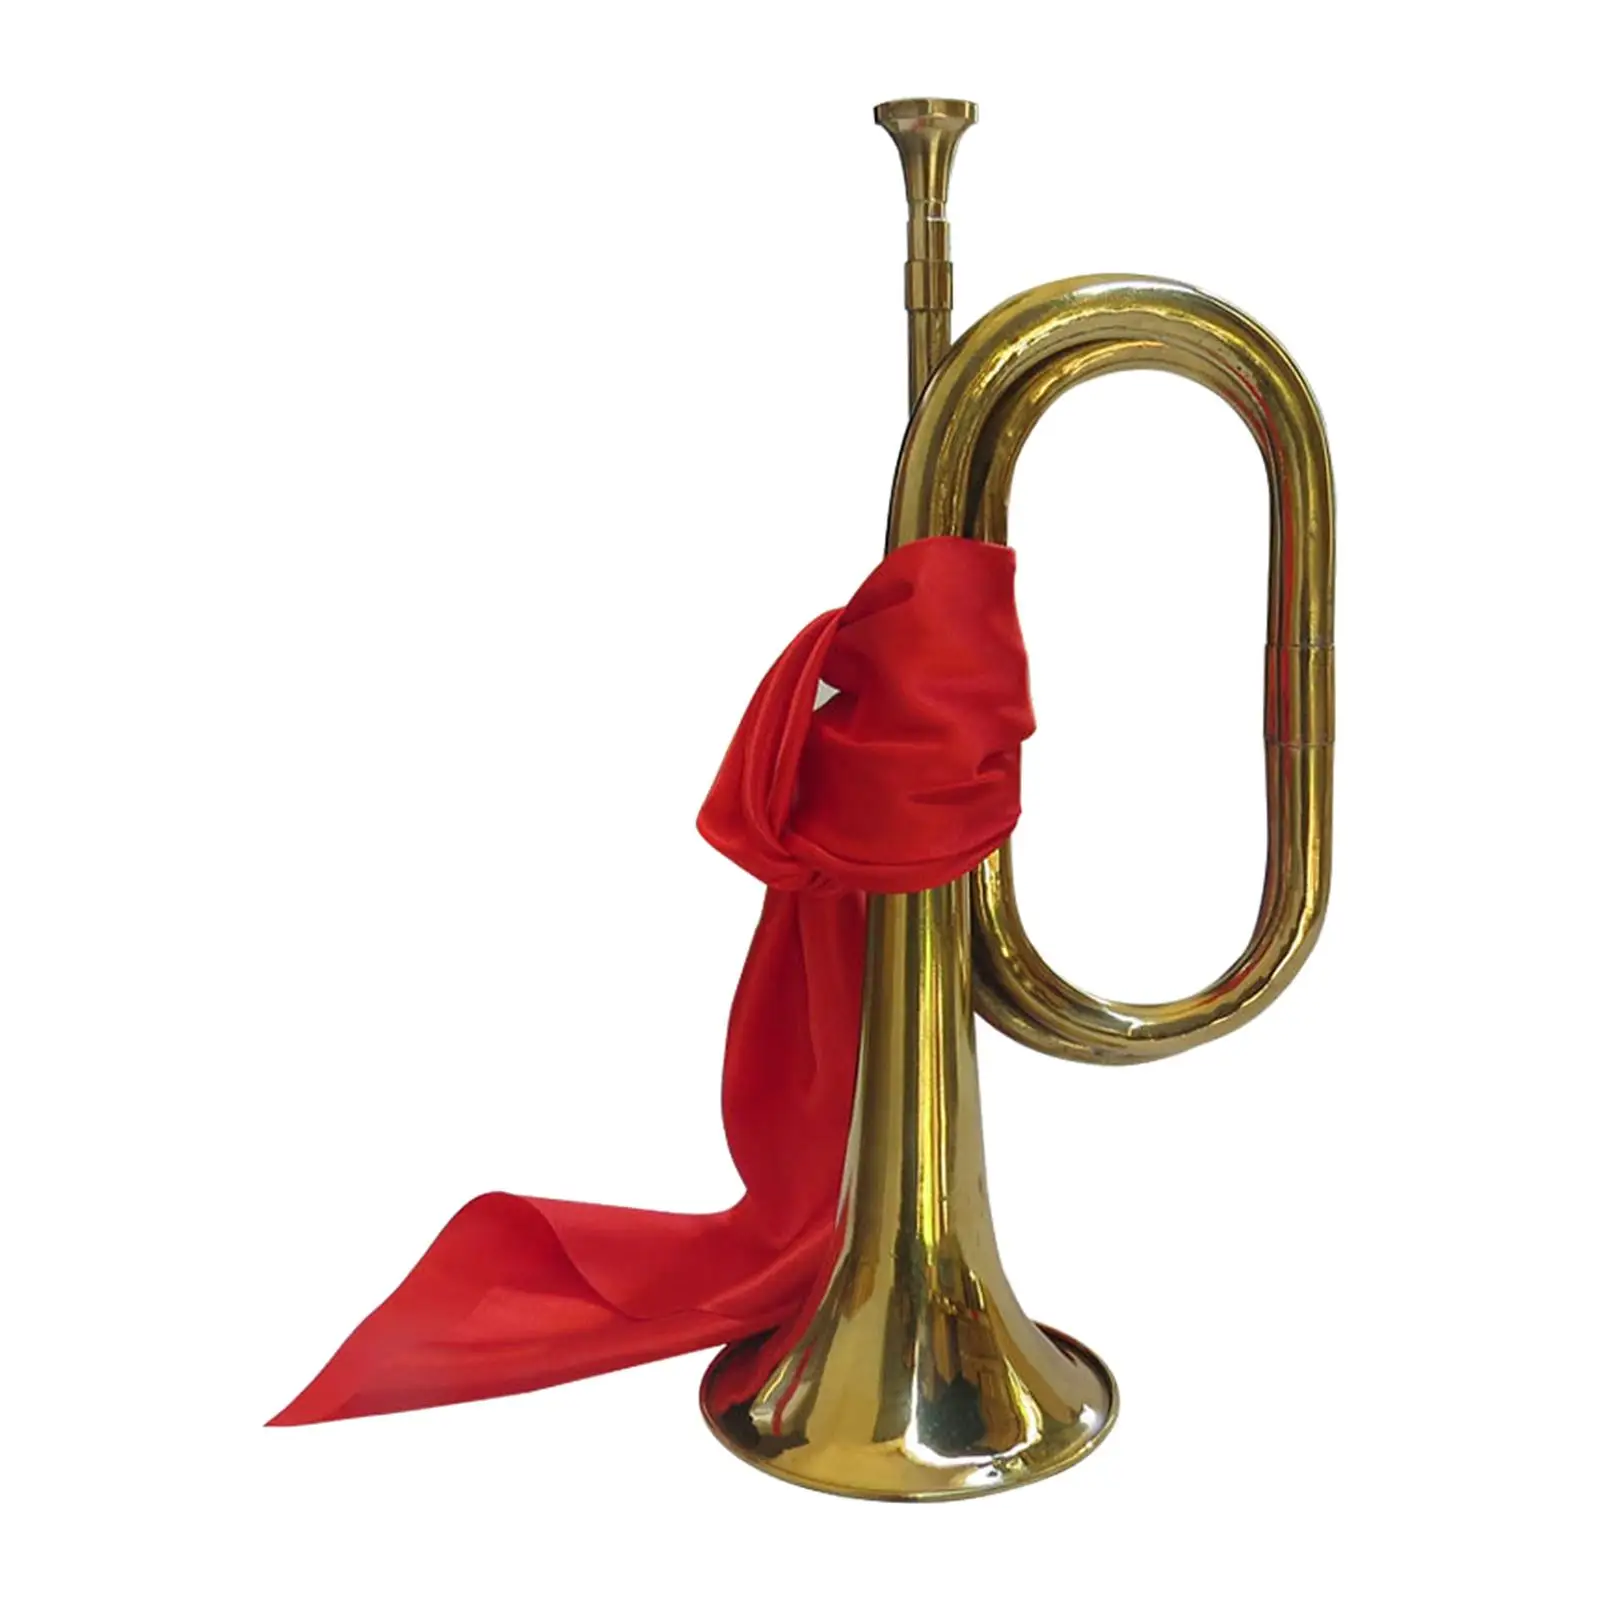 

Brass Cheering Trumpet, 13" Orchestra Portable Bugles with Red Cloth, Cavalry Trumpet for Beginner